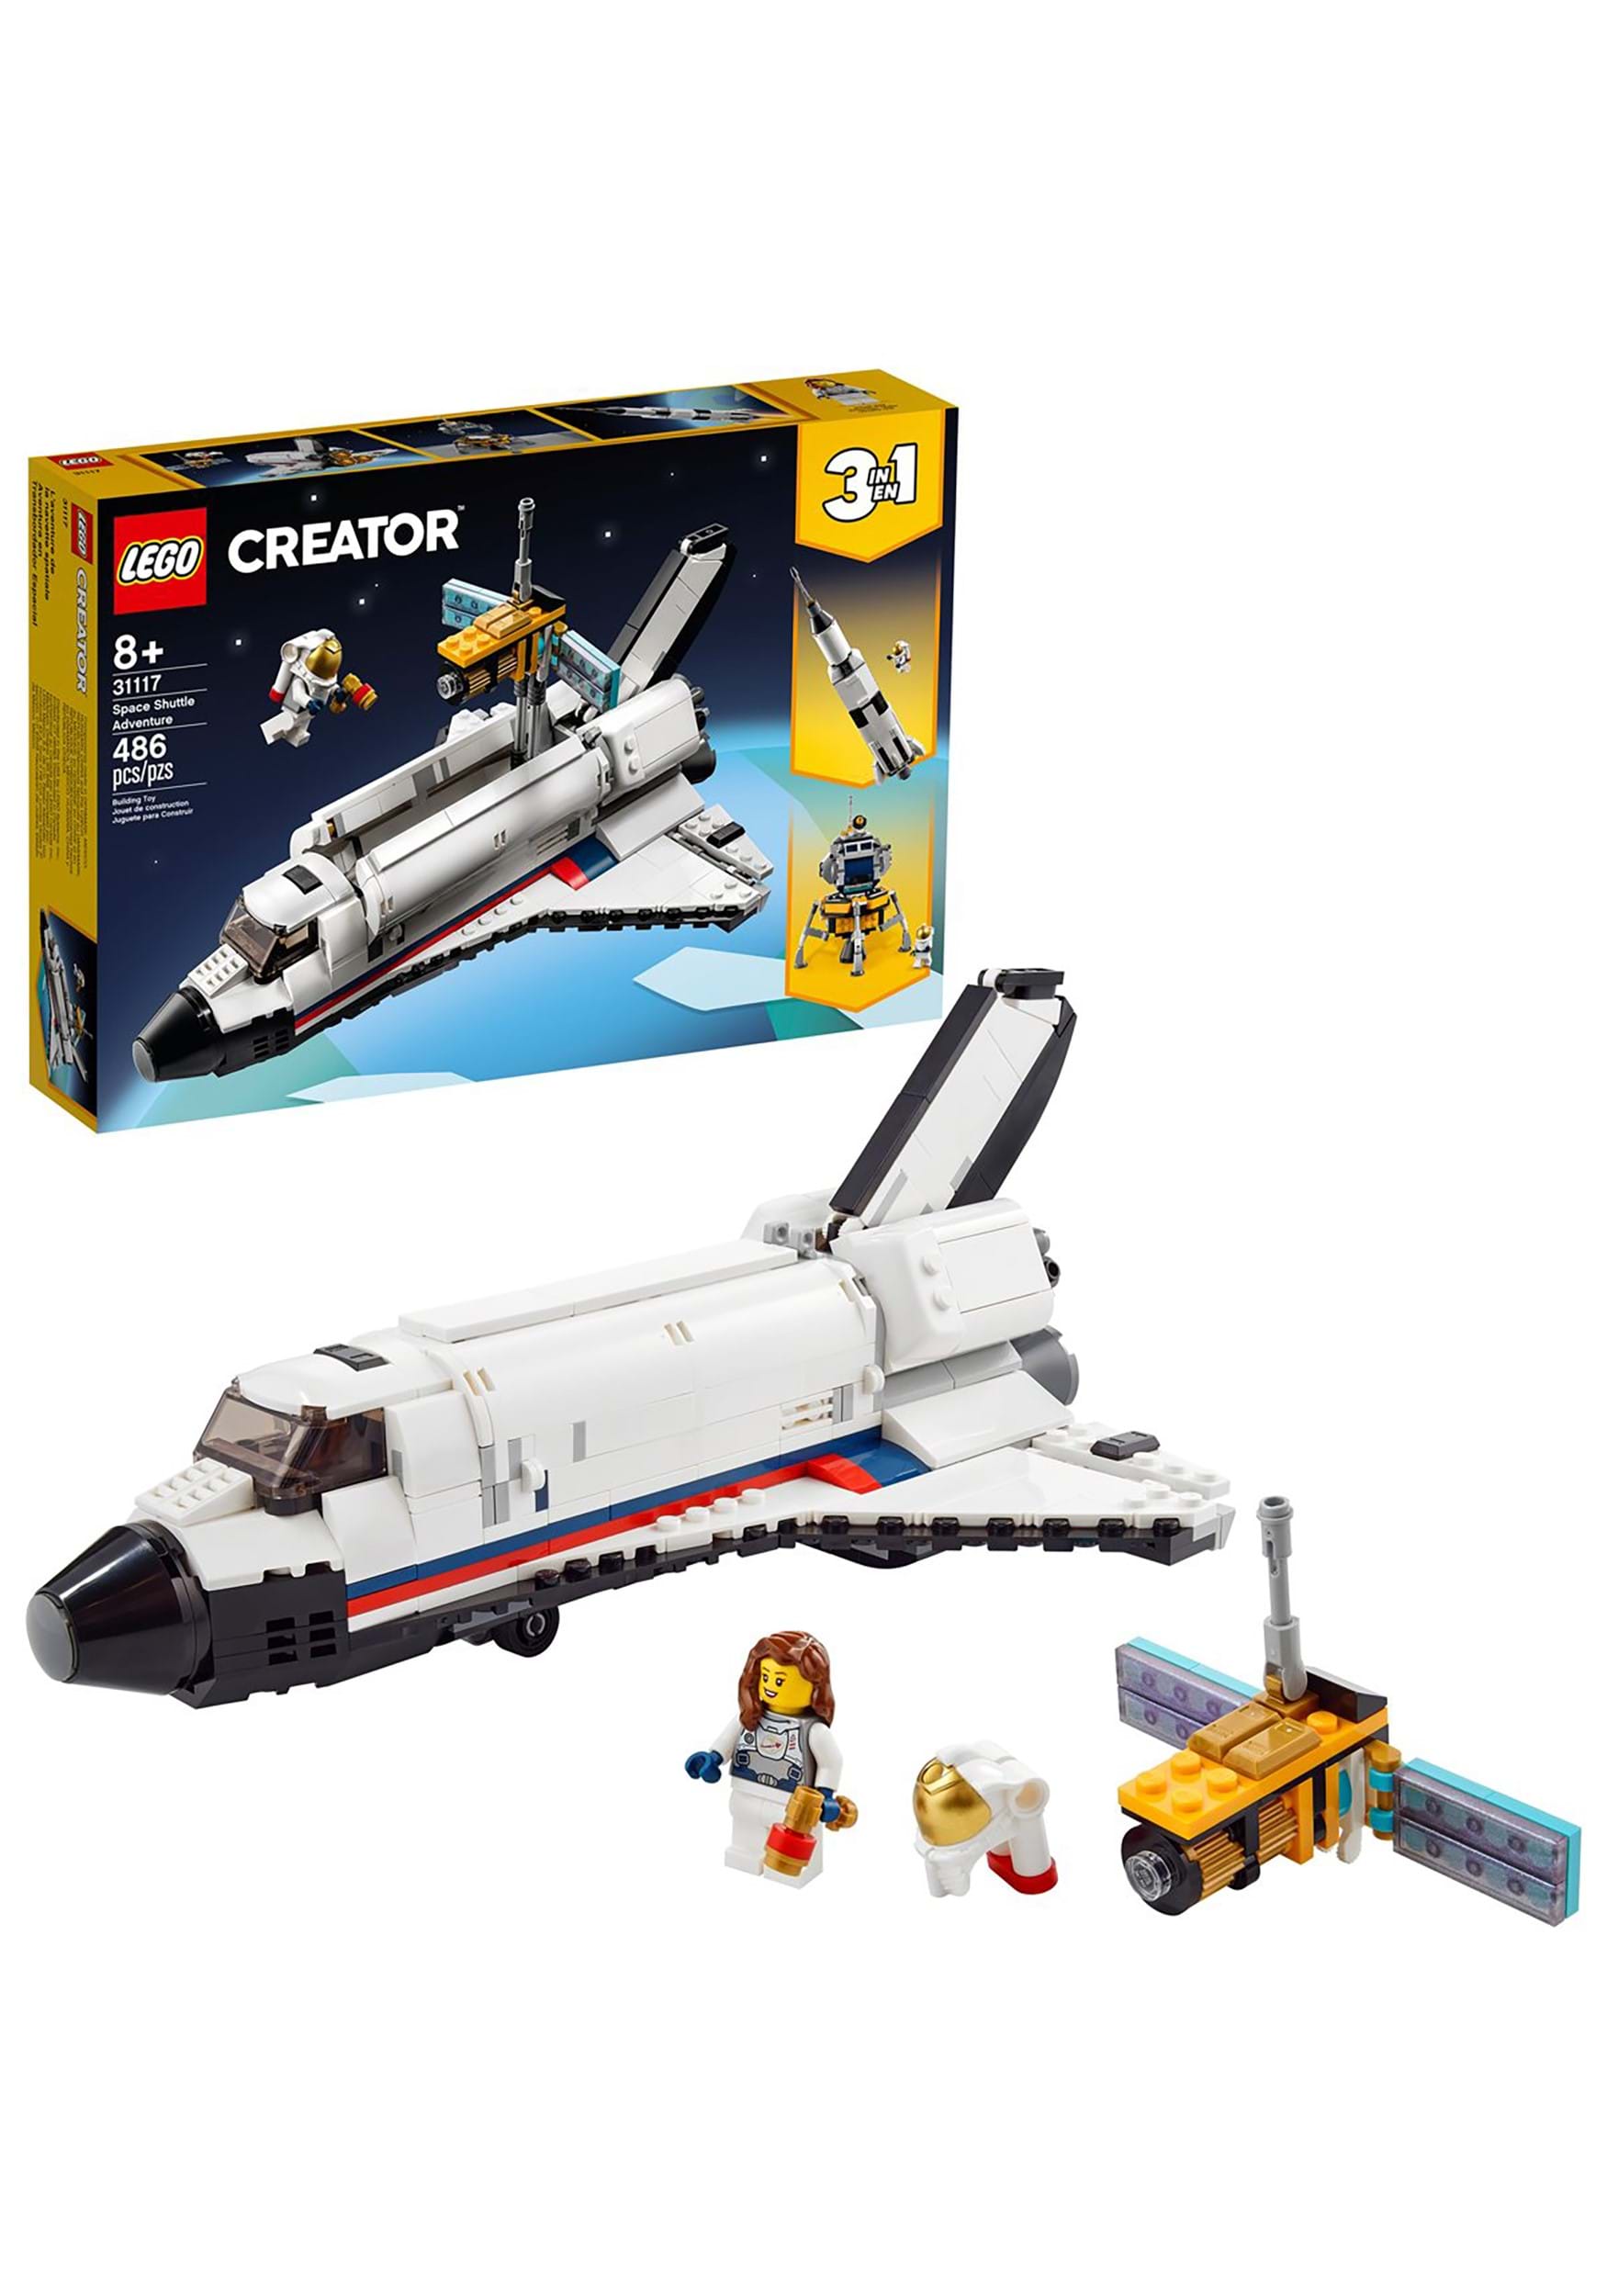 Space Shuttle Adventure from LEGO